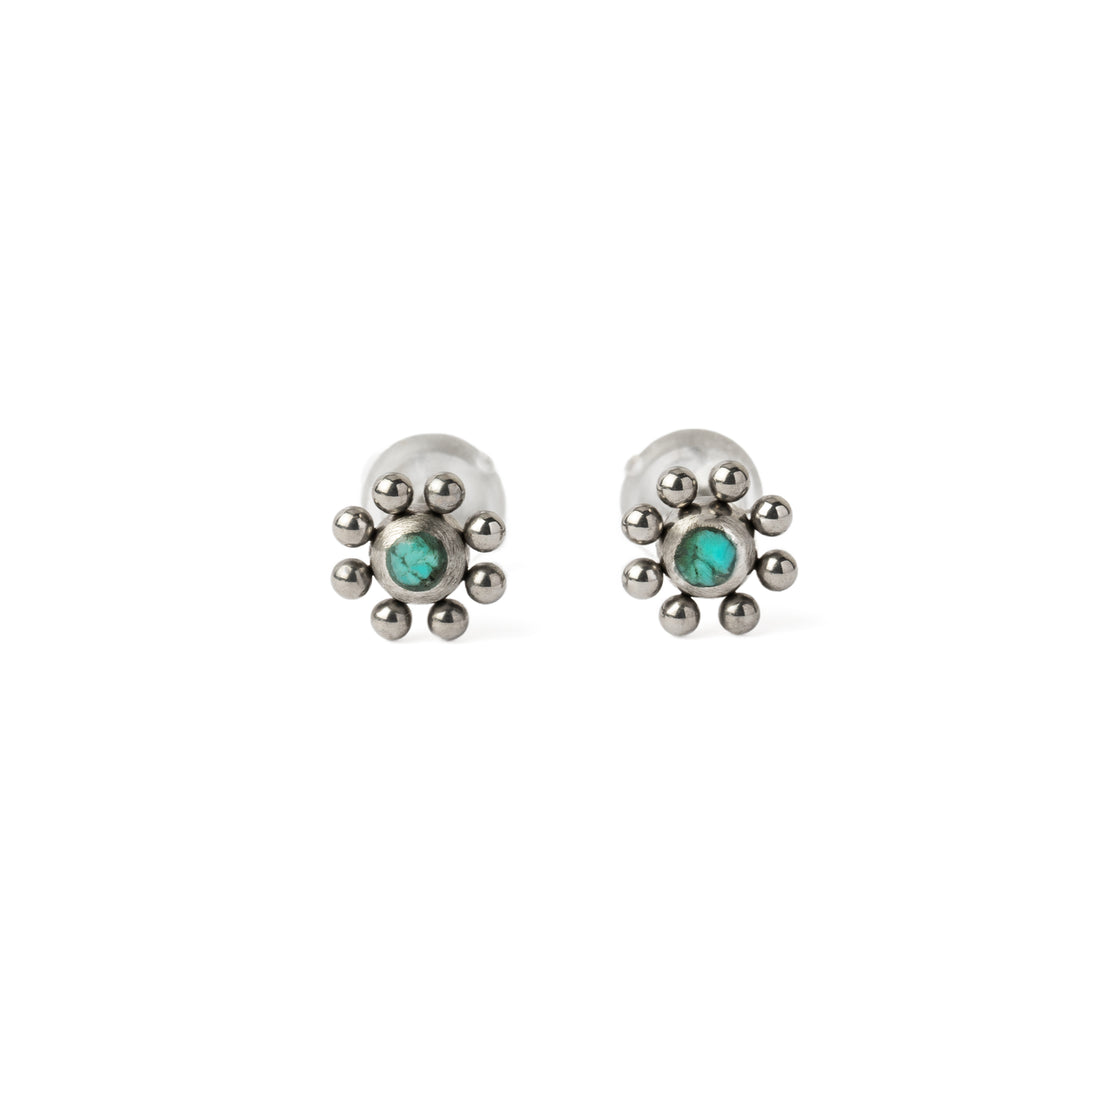 Daisy Turquoise Ear Studs frontal view